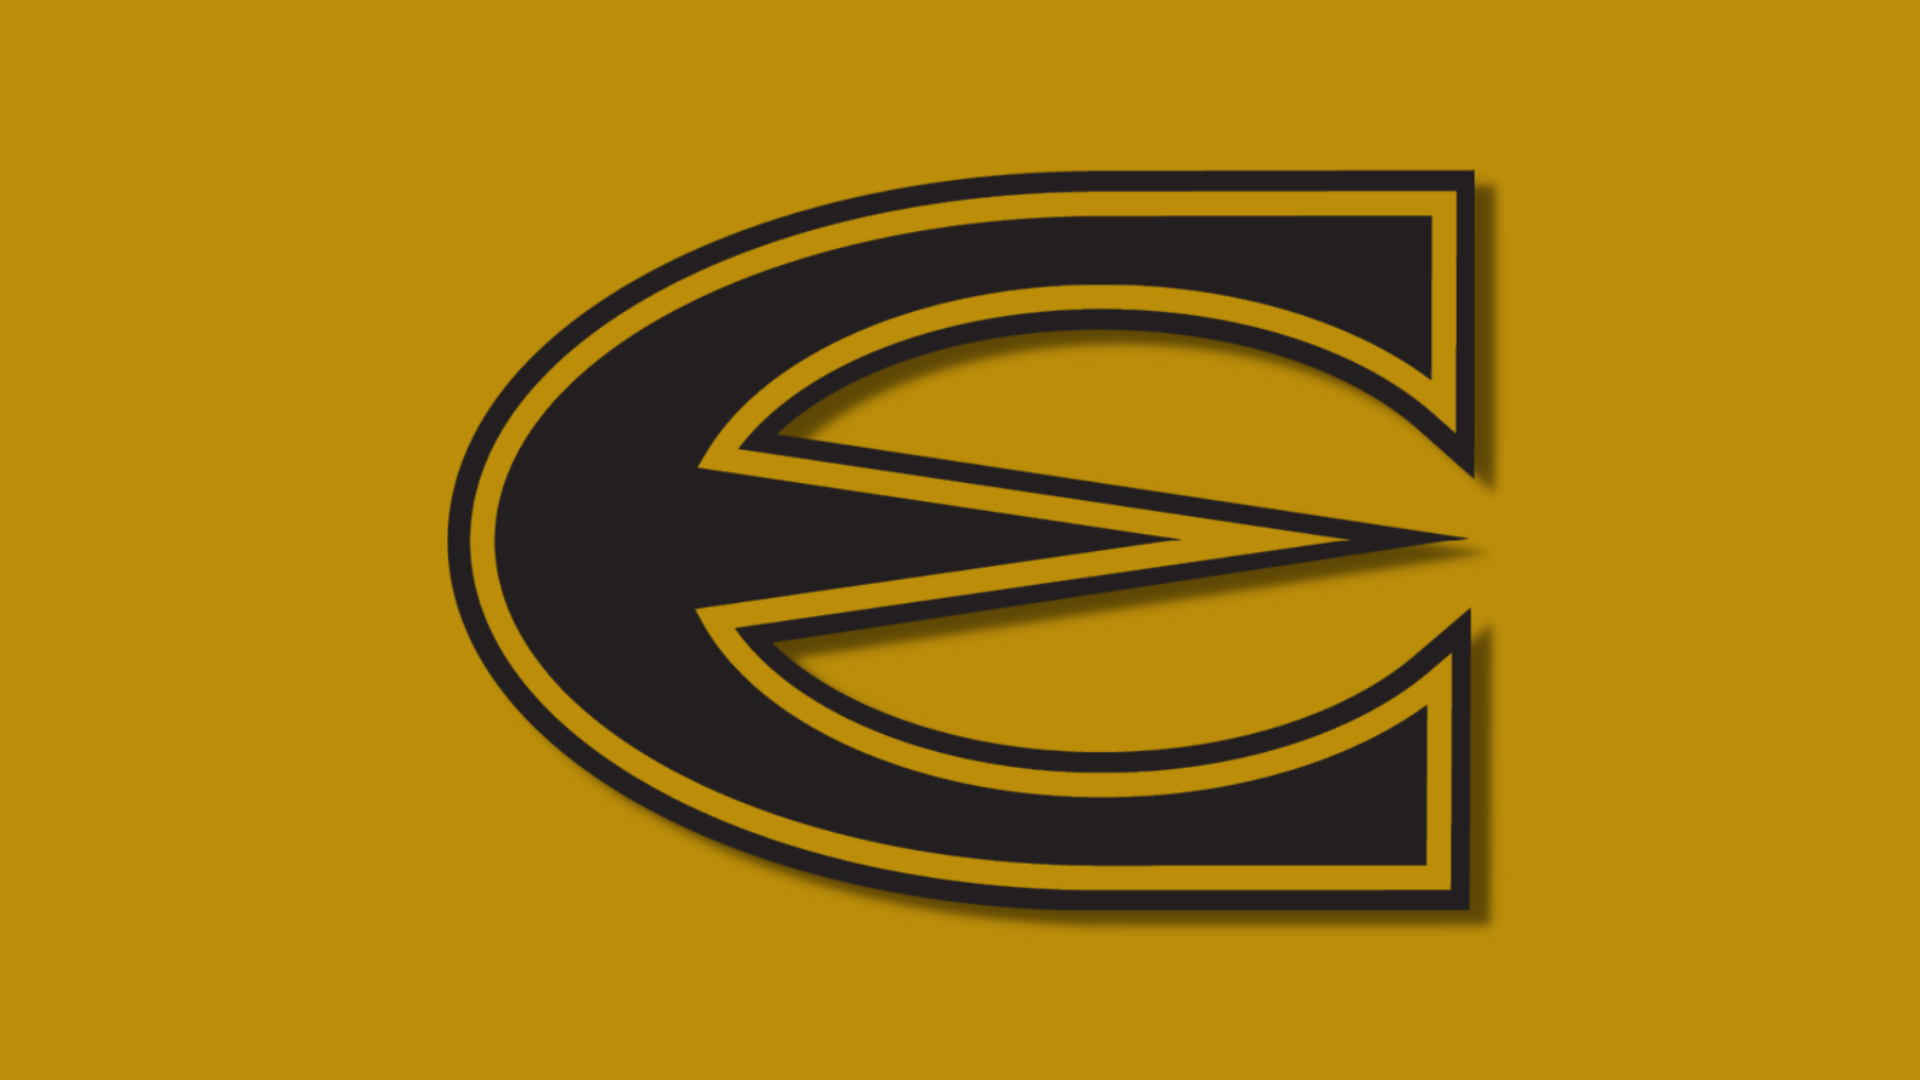 Tom Billeter: Two-Time National Coach of the Year Takes Lead at Emporia State